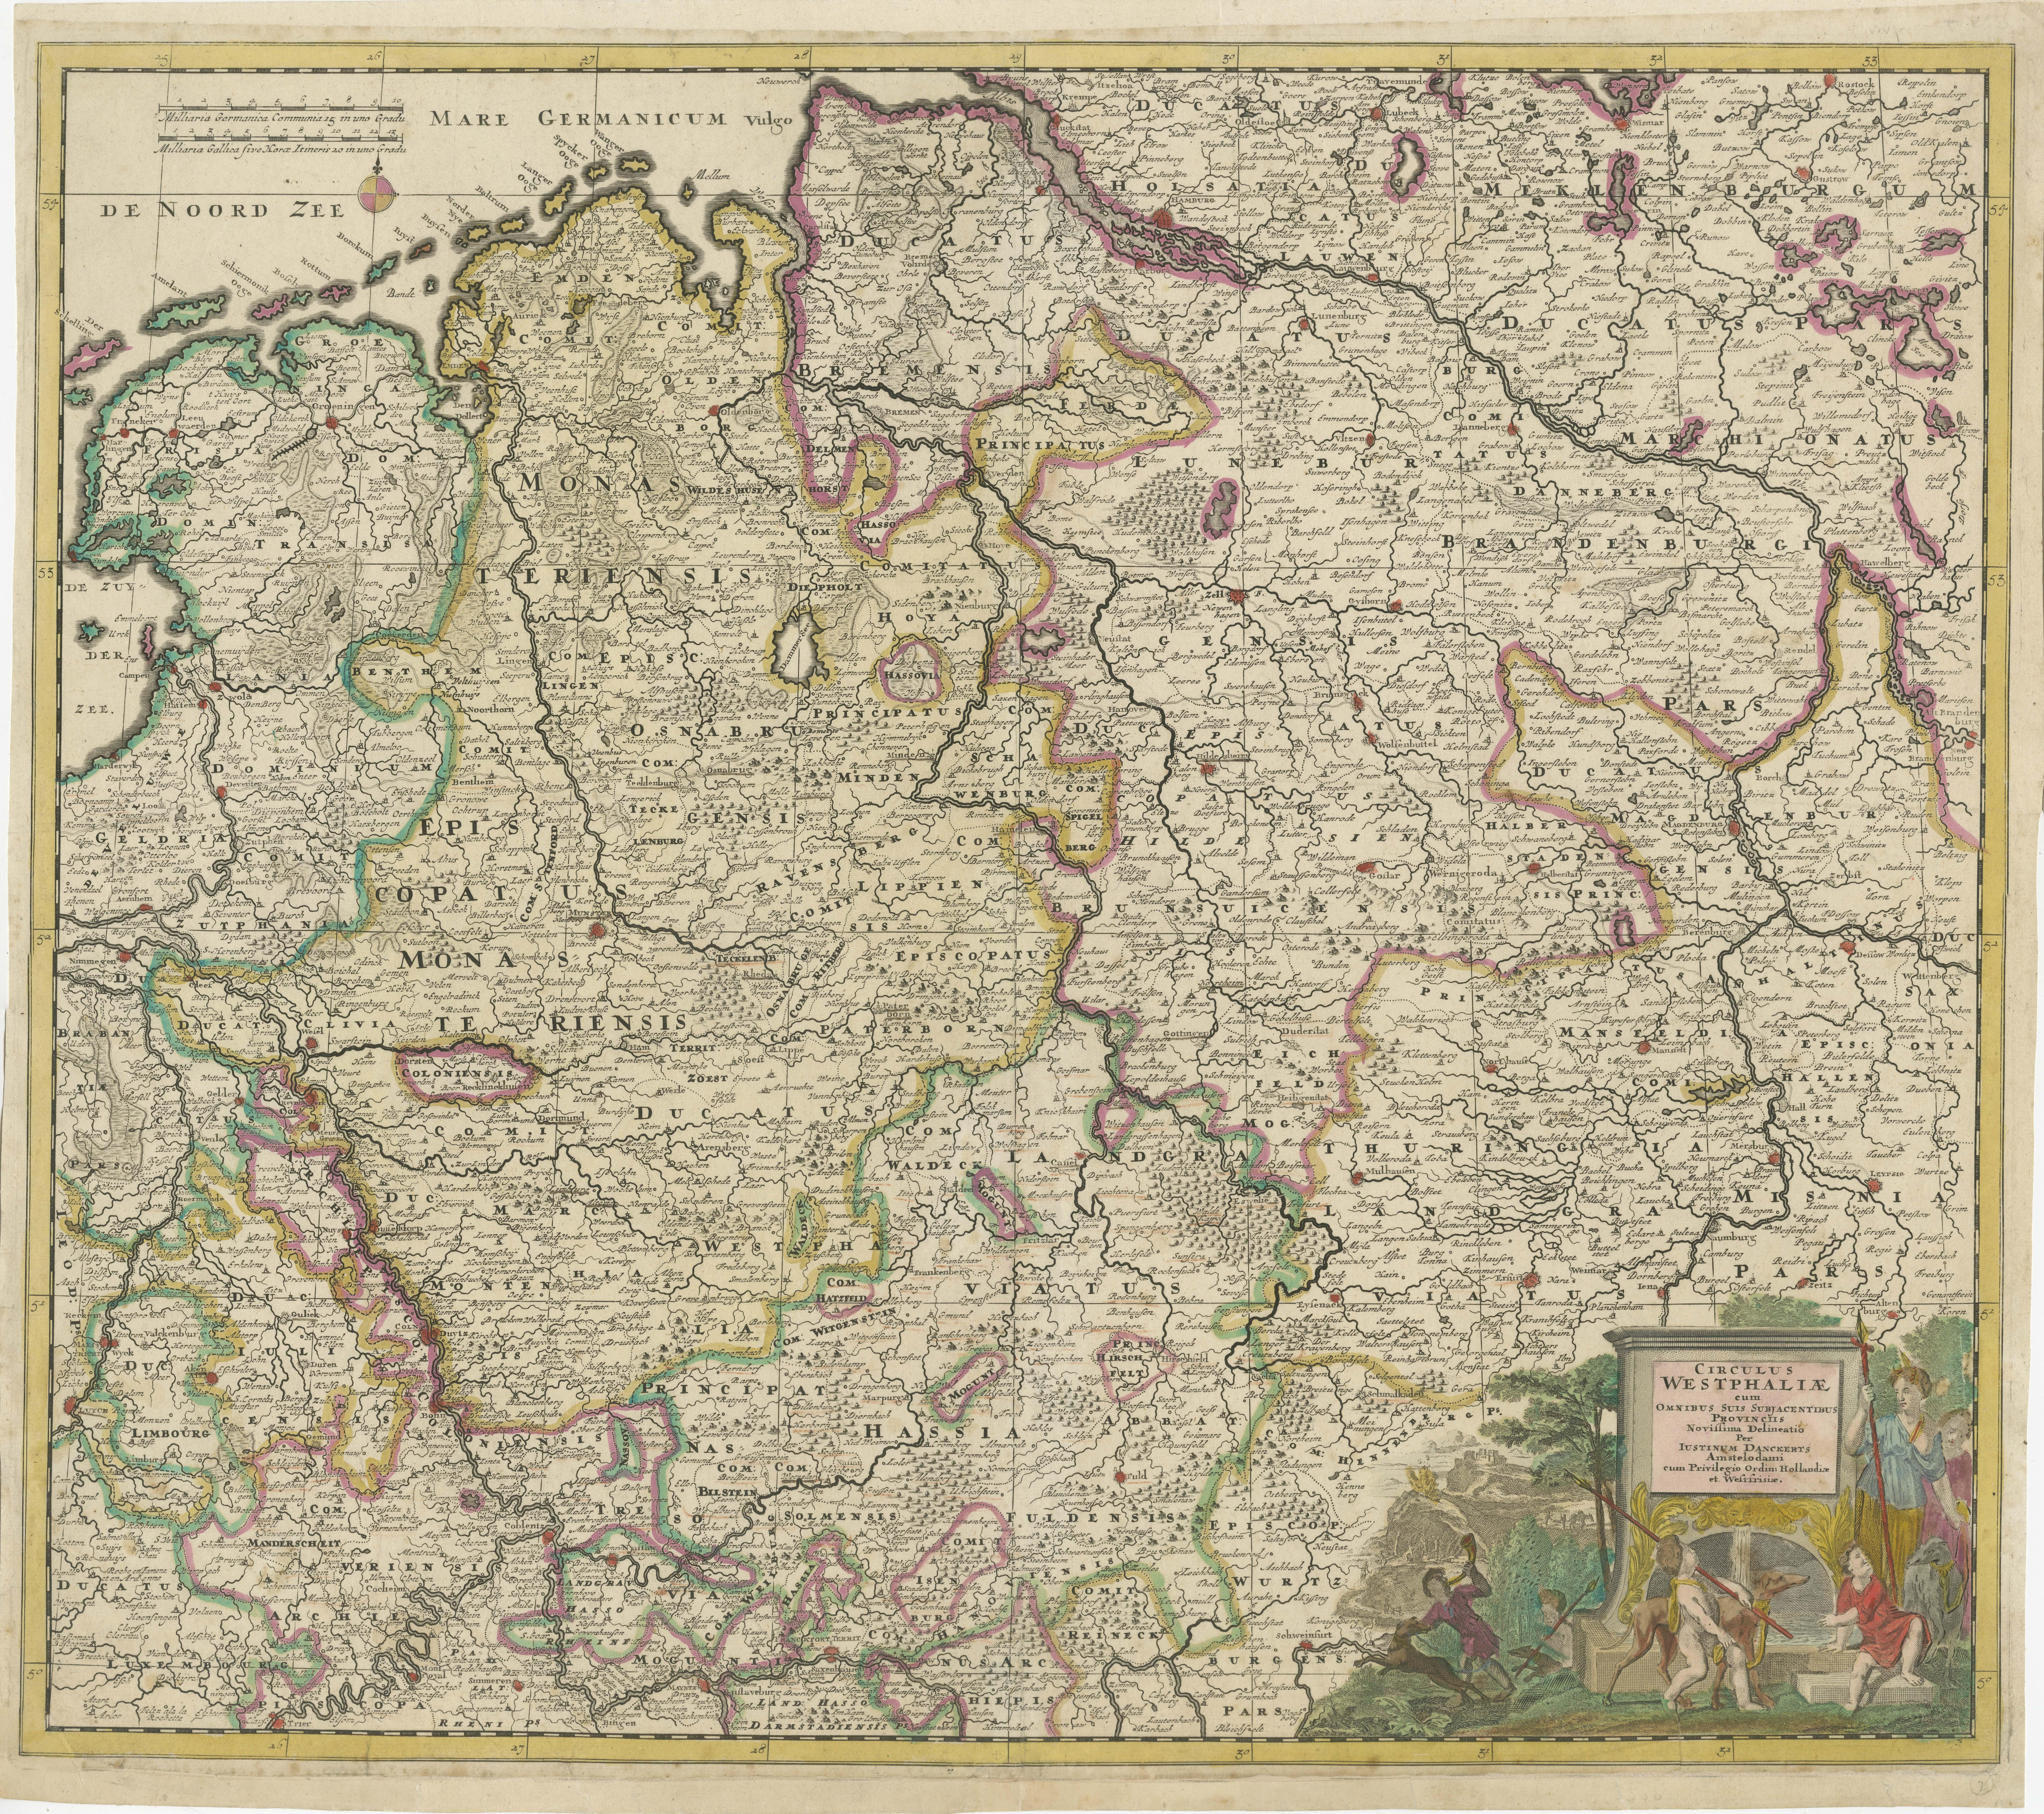 Antique map titled 'Circulus Westphaliae (..)'. Original old map of the Westphalia region, Germany. Published by Justus Danckerts, circa 1696. 

Justus Danckerts I (11 November 1635 in Amsterdam – 16 July 1701 in Amsterdam) was a Dutch engraver and